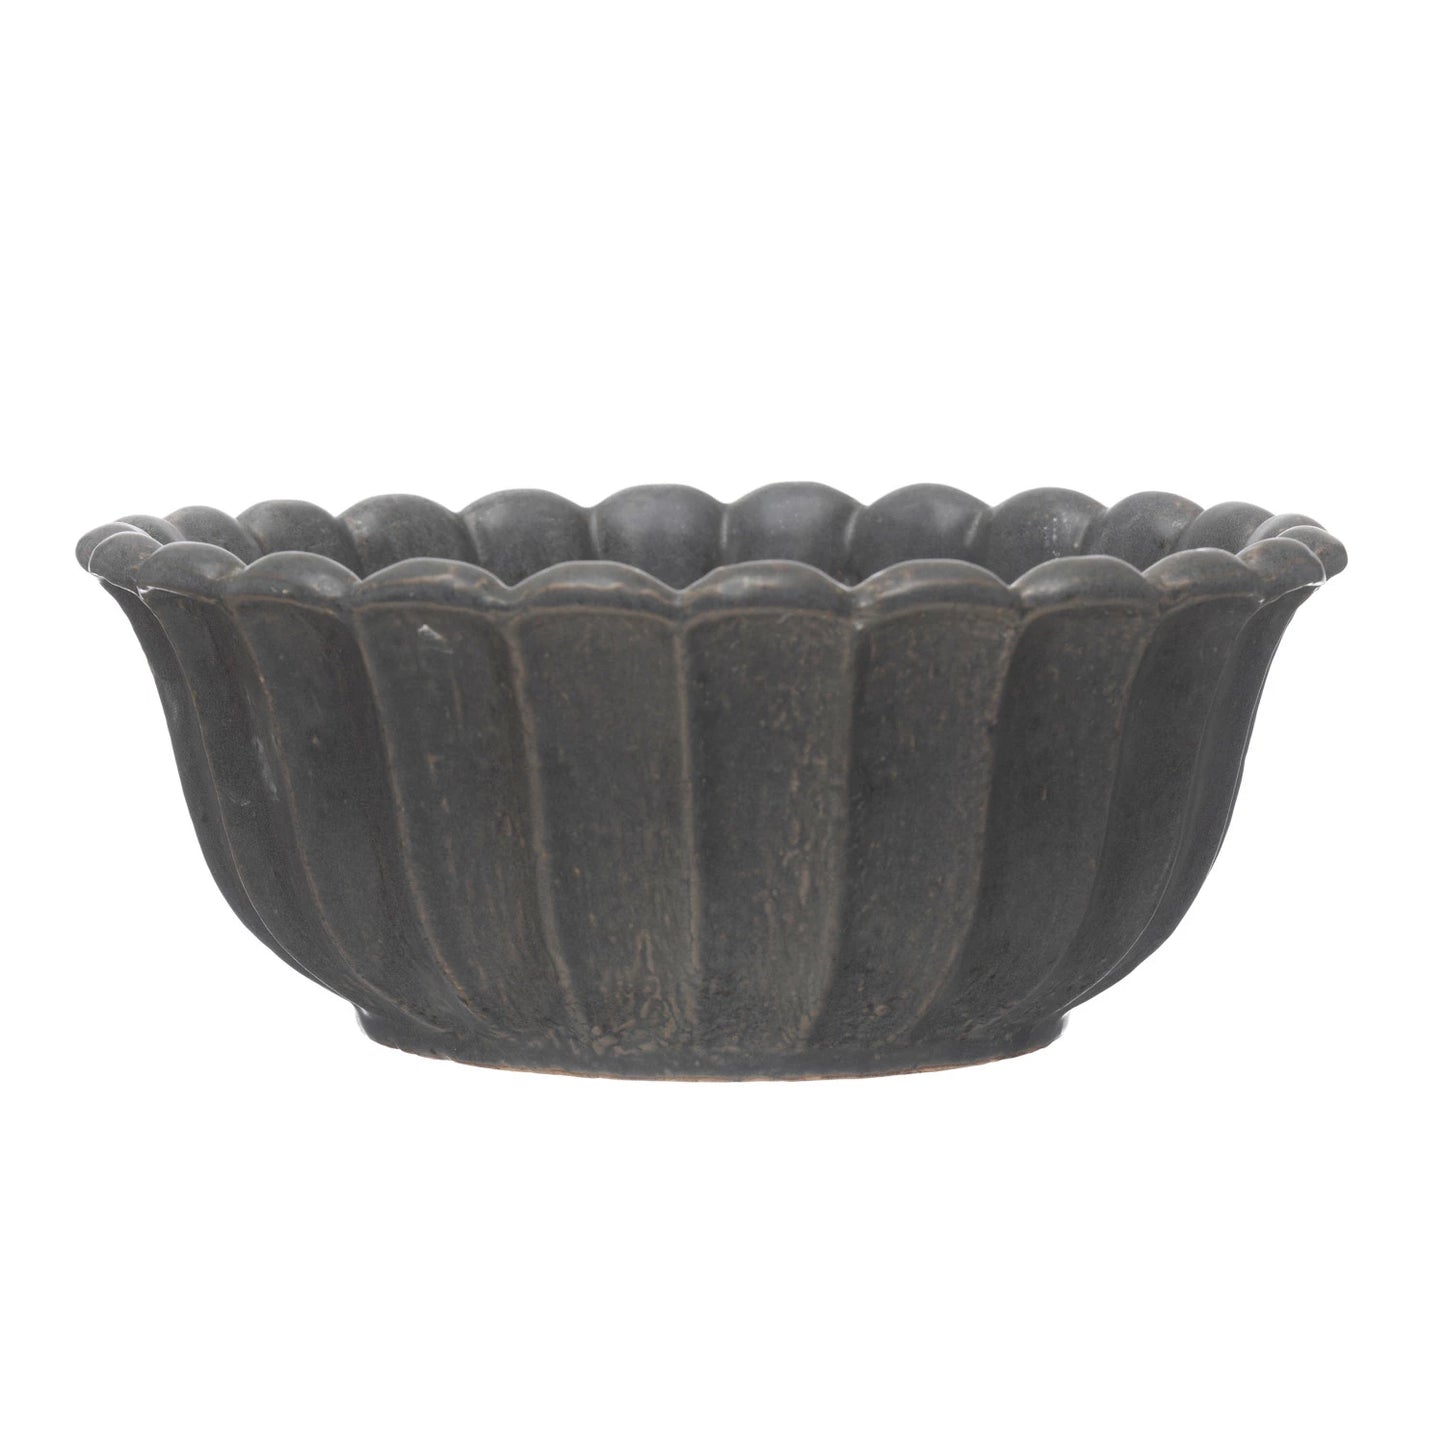 Speckled Charcoal Flower Stoneware Bowl